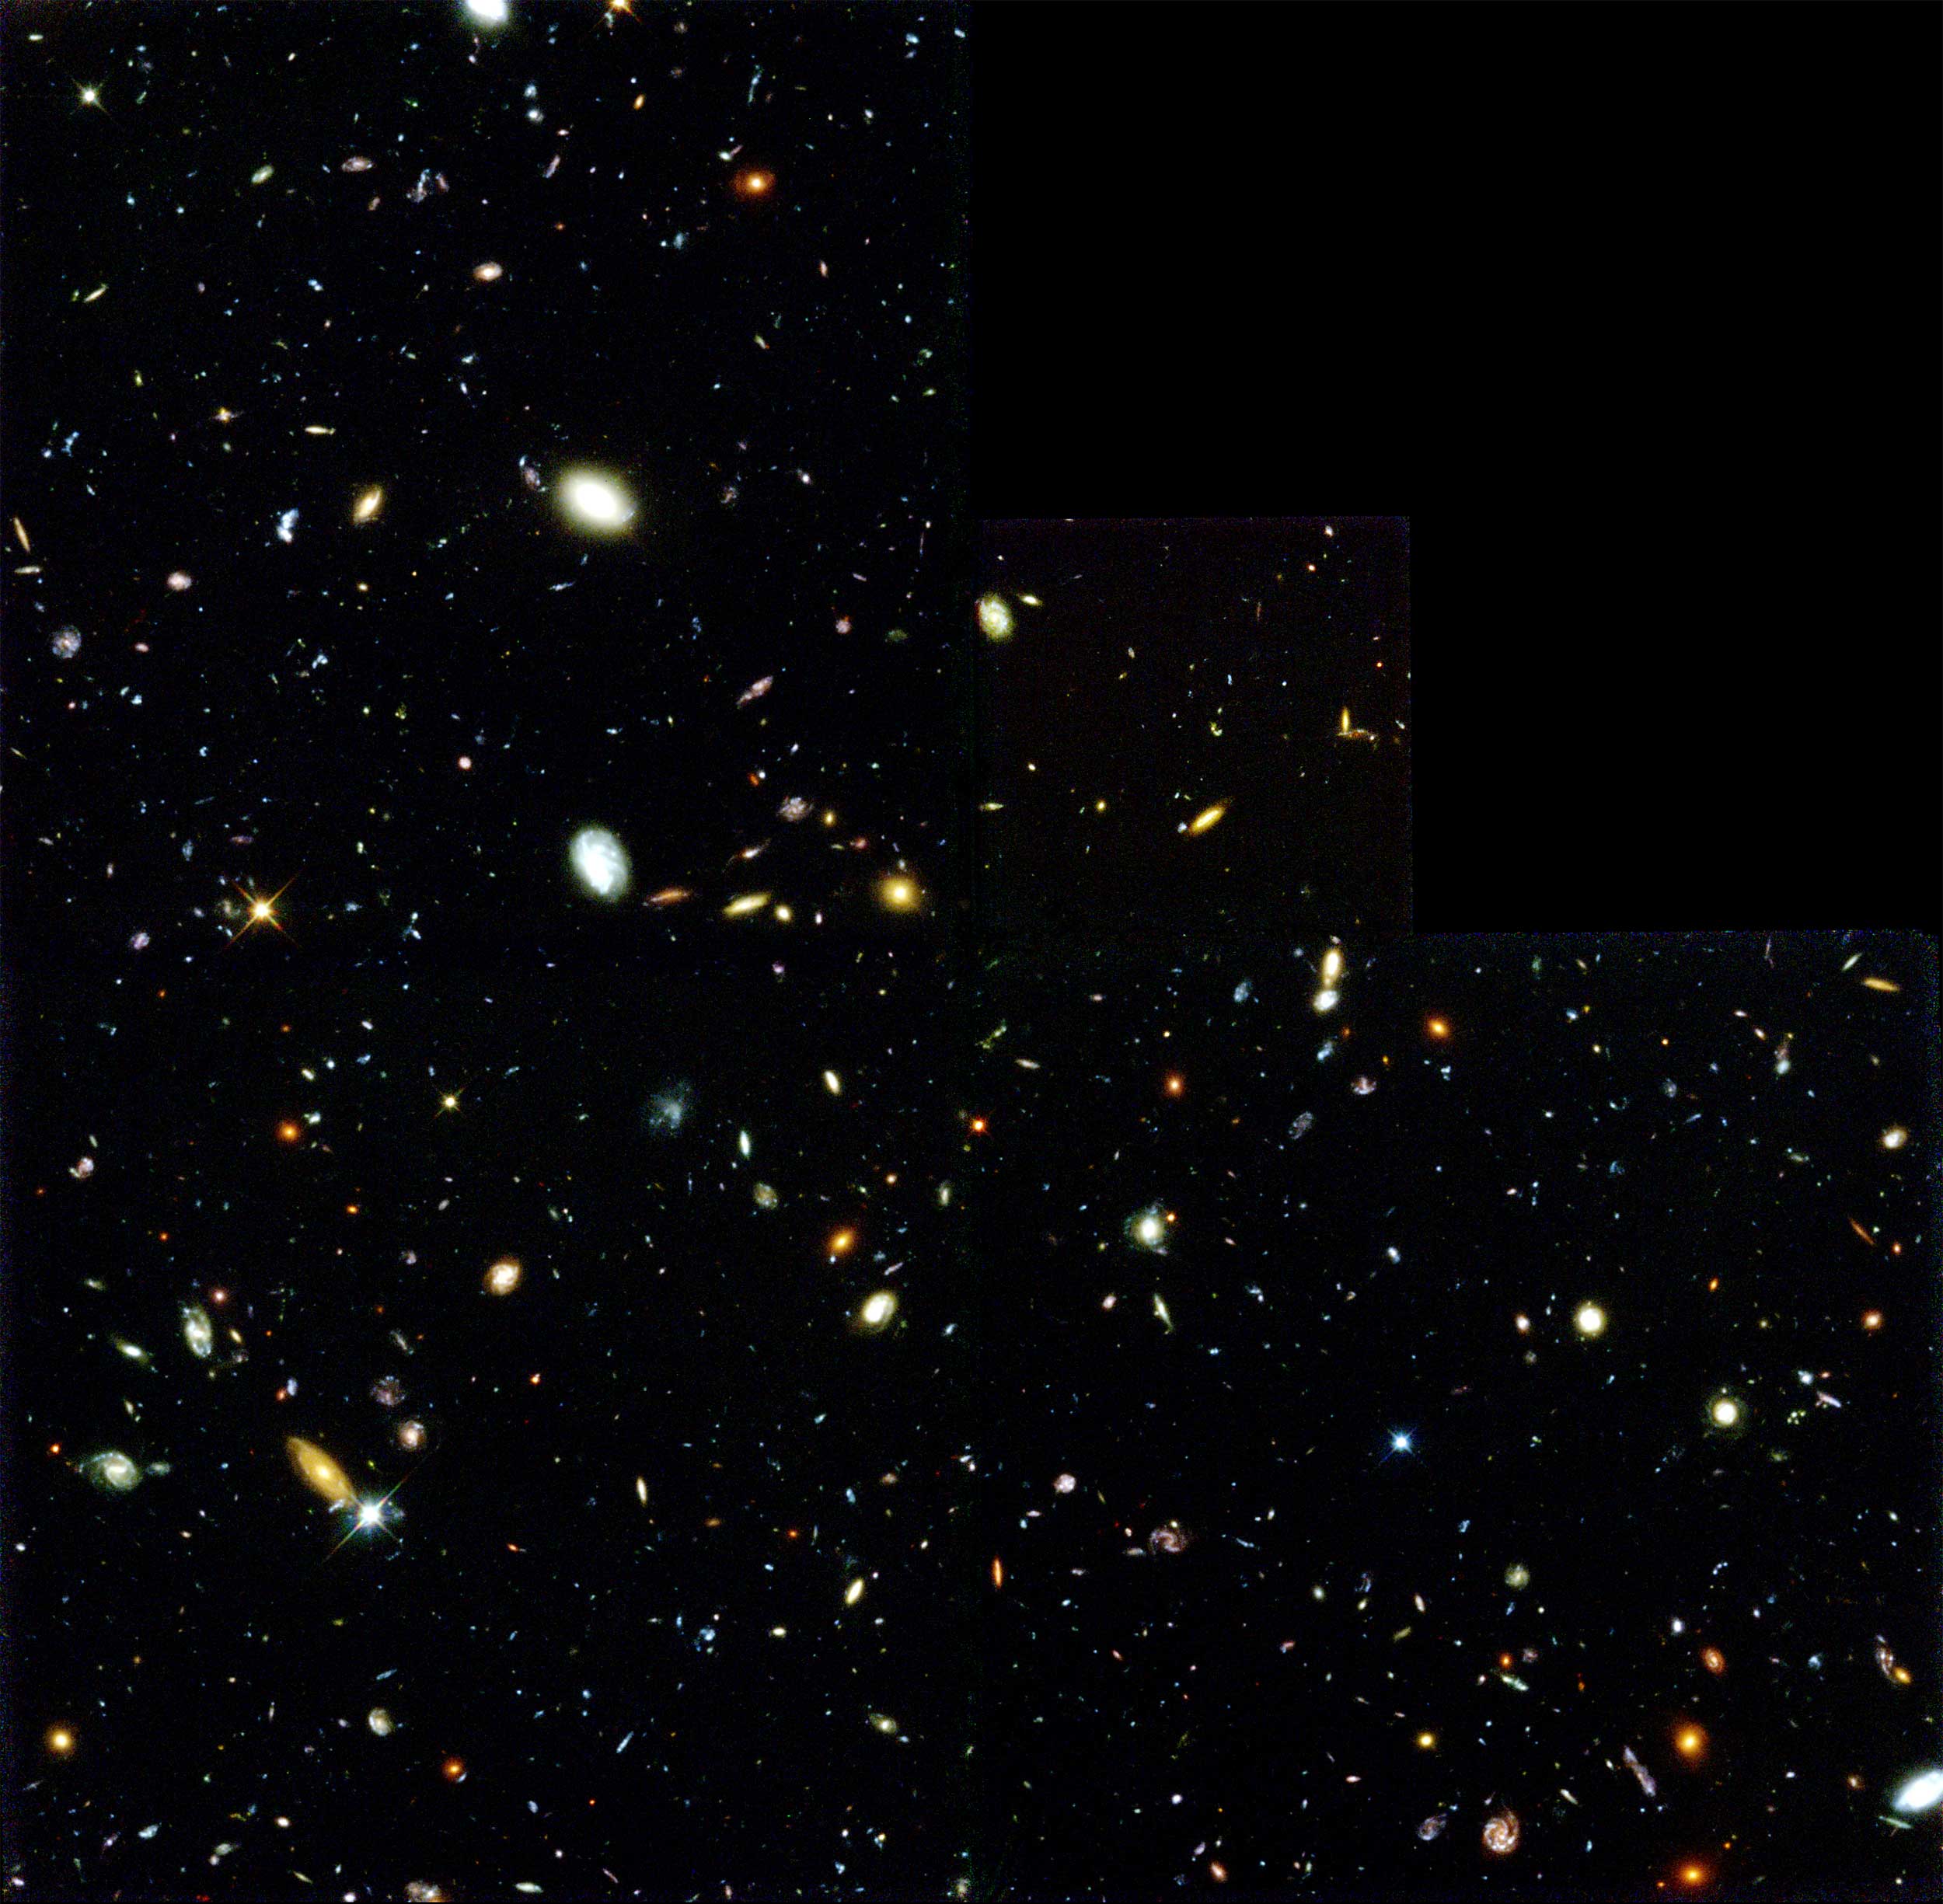 This image shows faraway galaxies as colorful dots in the black sky.